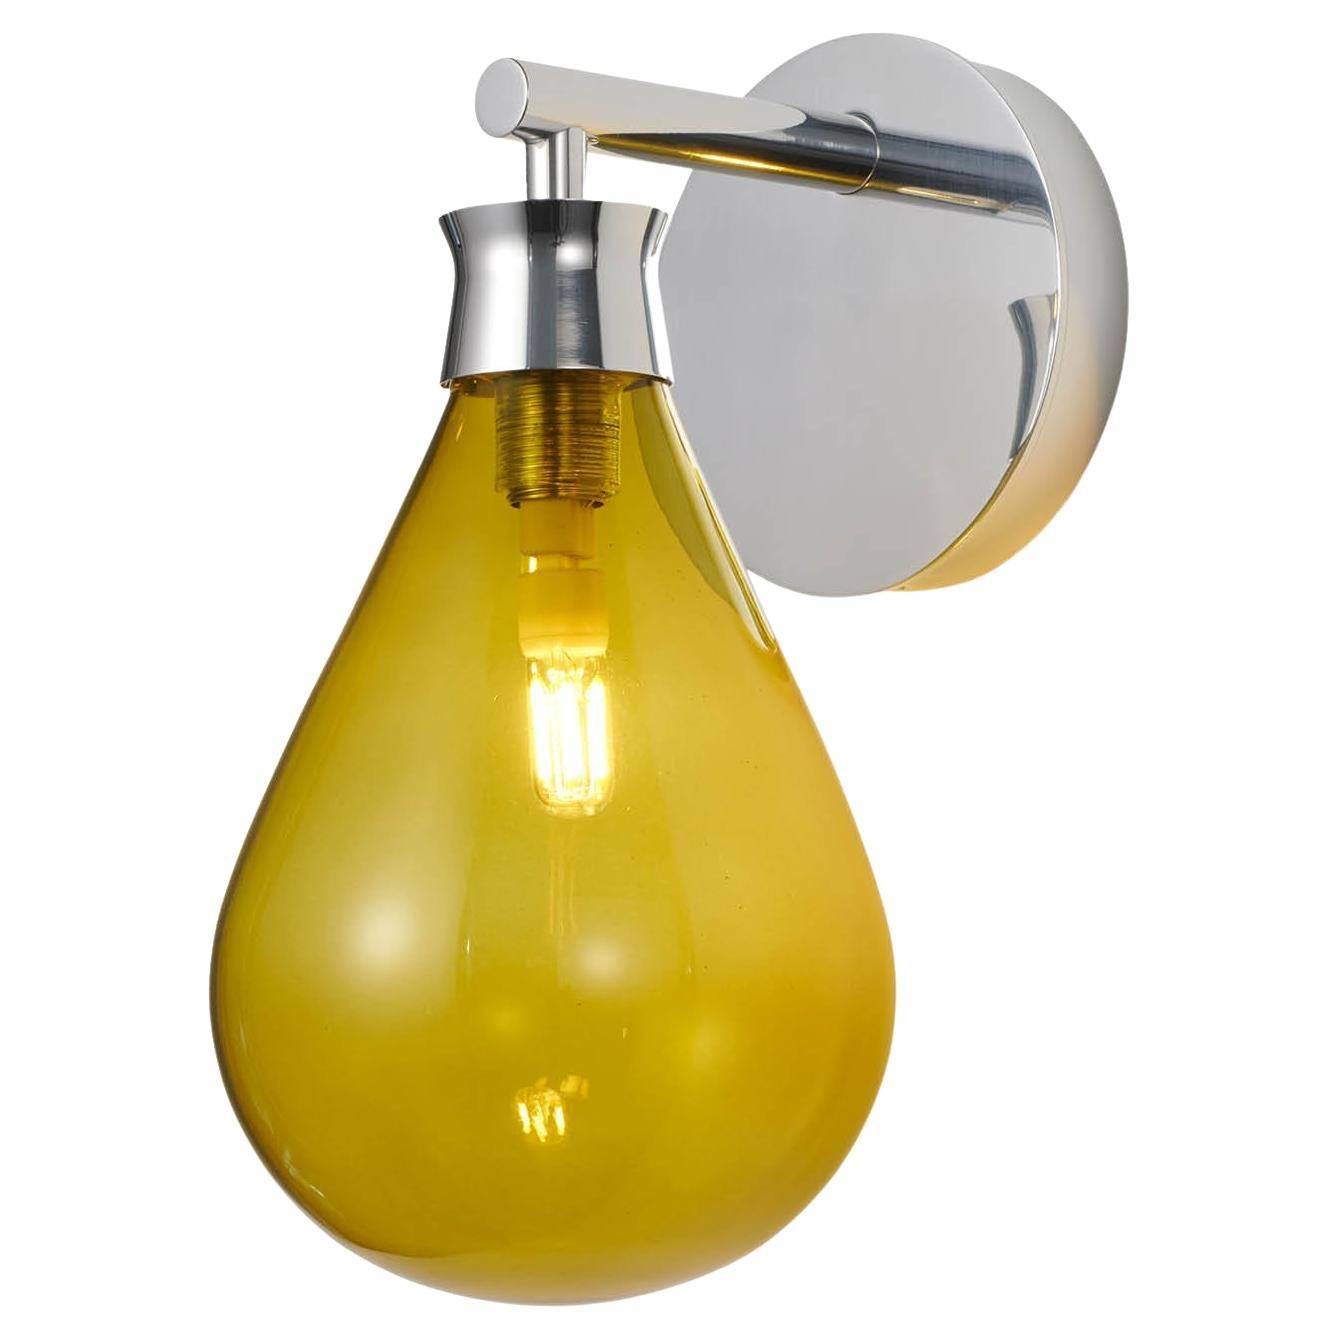 Cintola Wall Light in Polished Aluminium with Olive Handblown Glass Globe